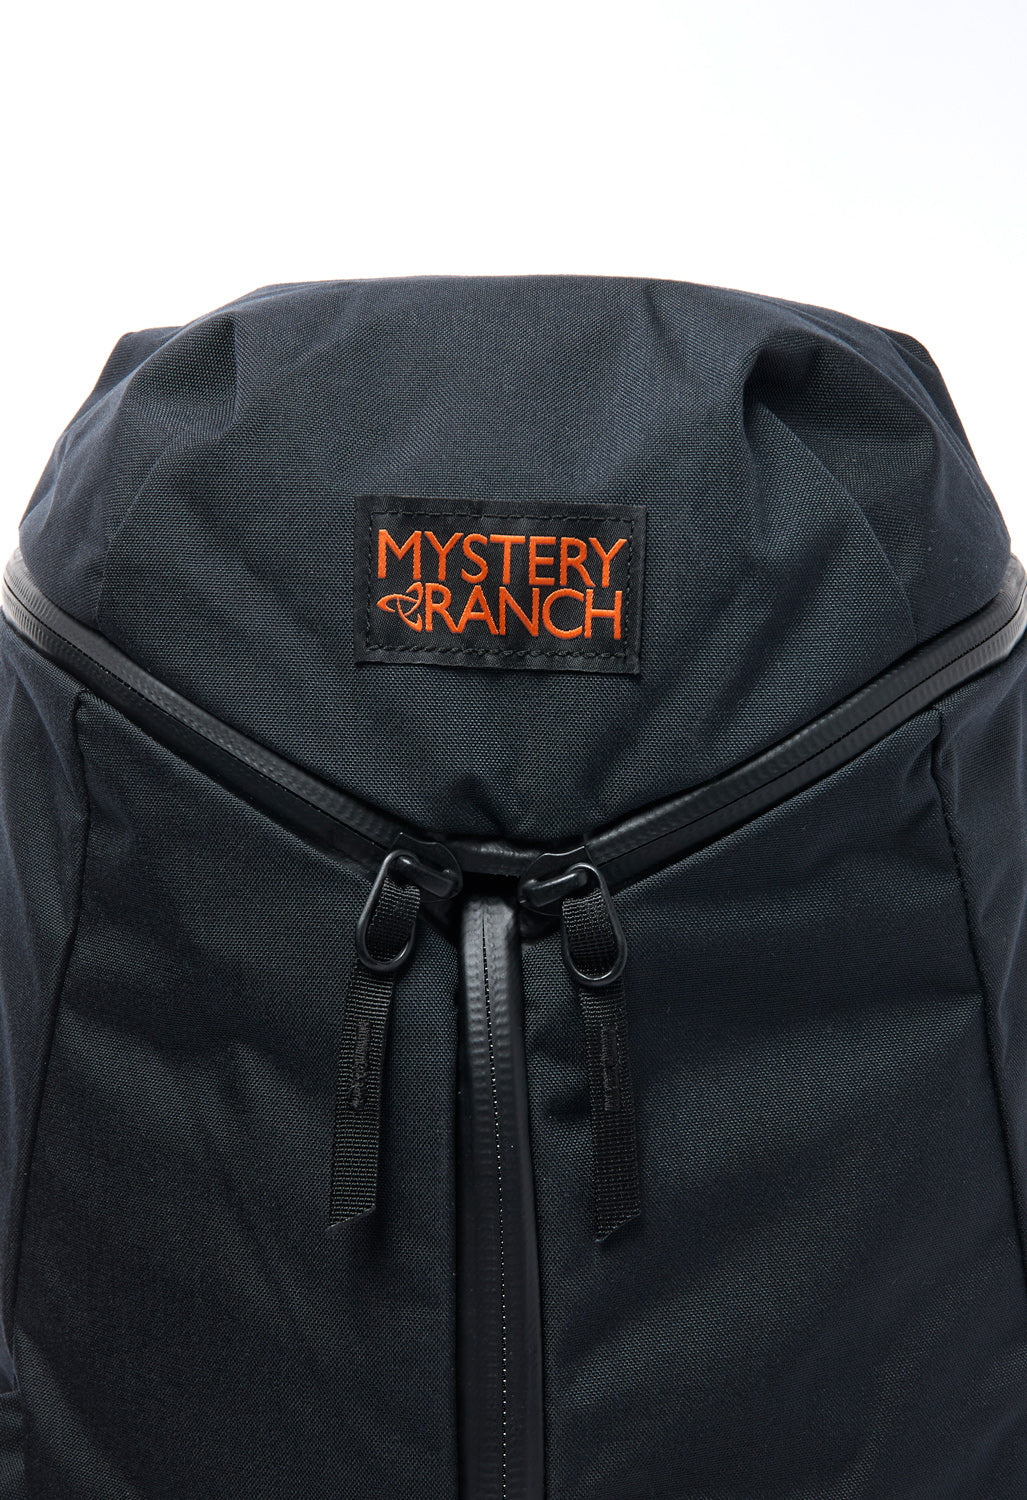 Mystery Ranch Catalyst 22 Pack - Black